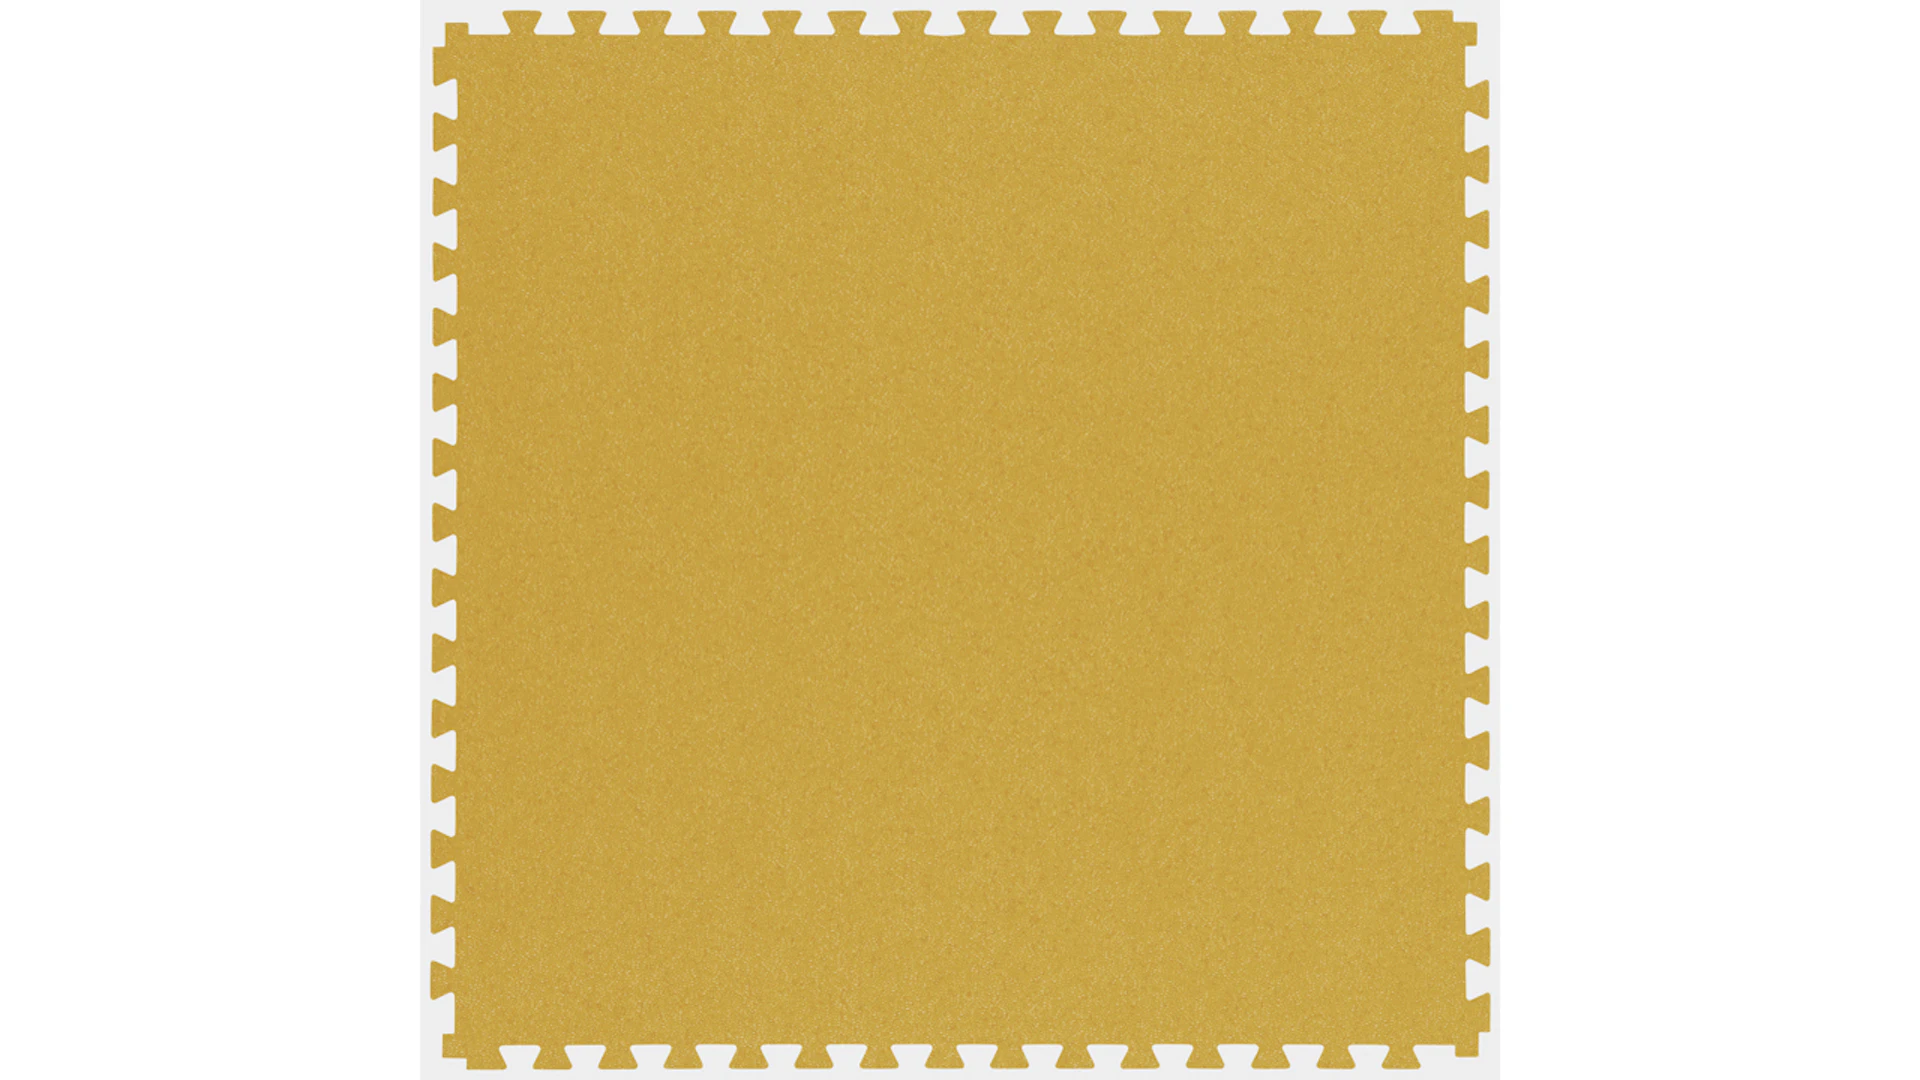 Gerflor Industrieboden GTI MAX CONNECT Uni Yellow (26570244)